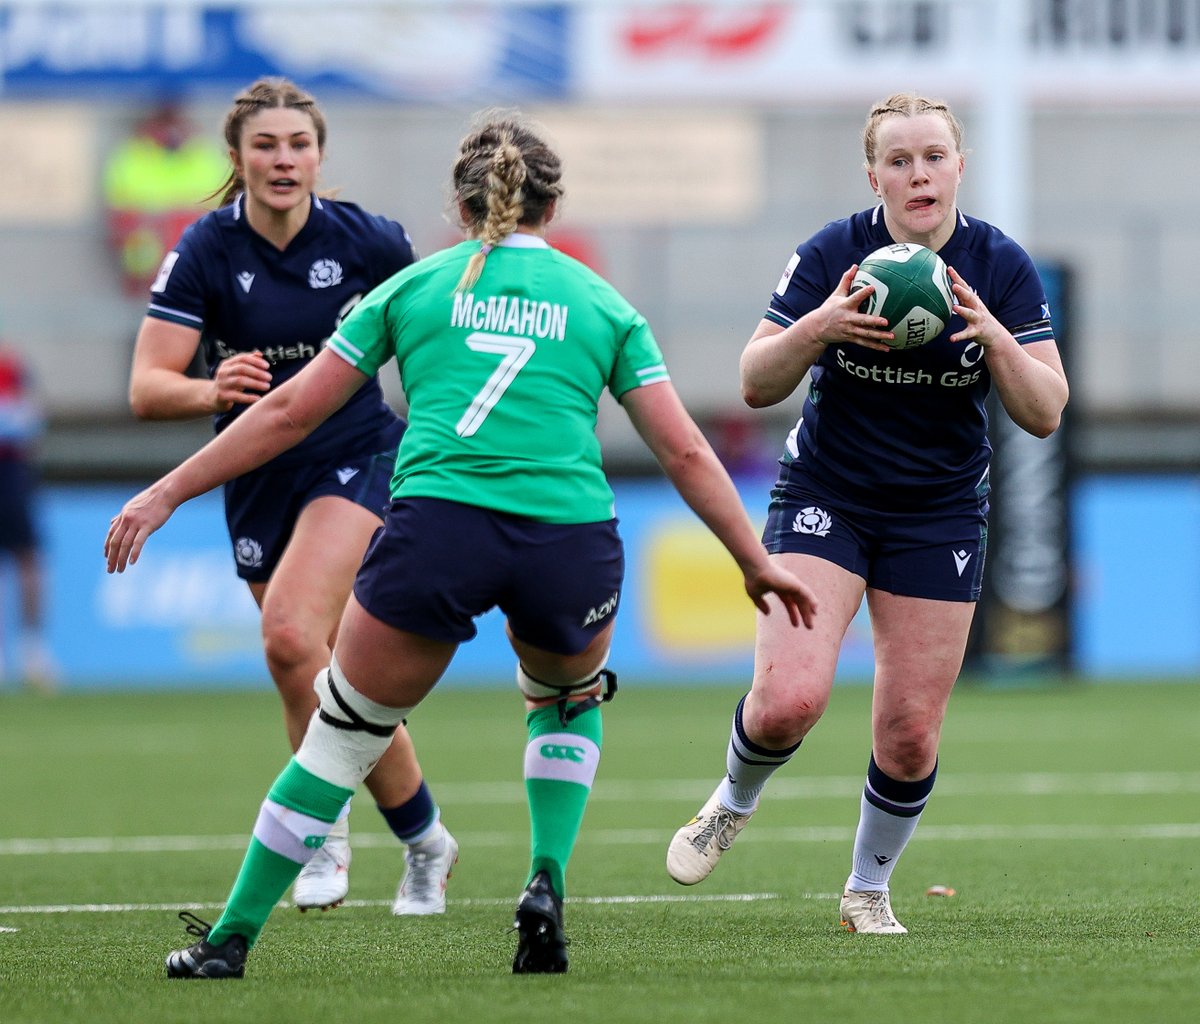 The report as we fall the wrong side of a tight contest in the final game of @Womens6Nations. 📰 tinyurl.com/nhhn9r99